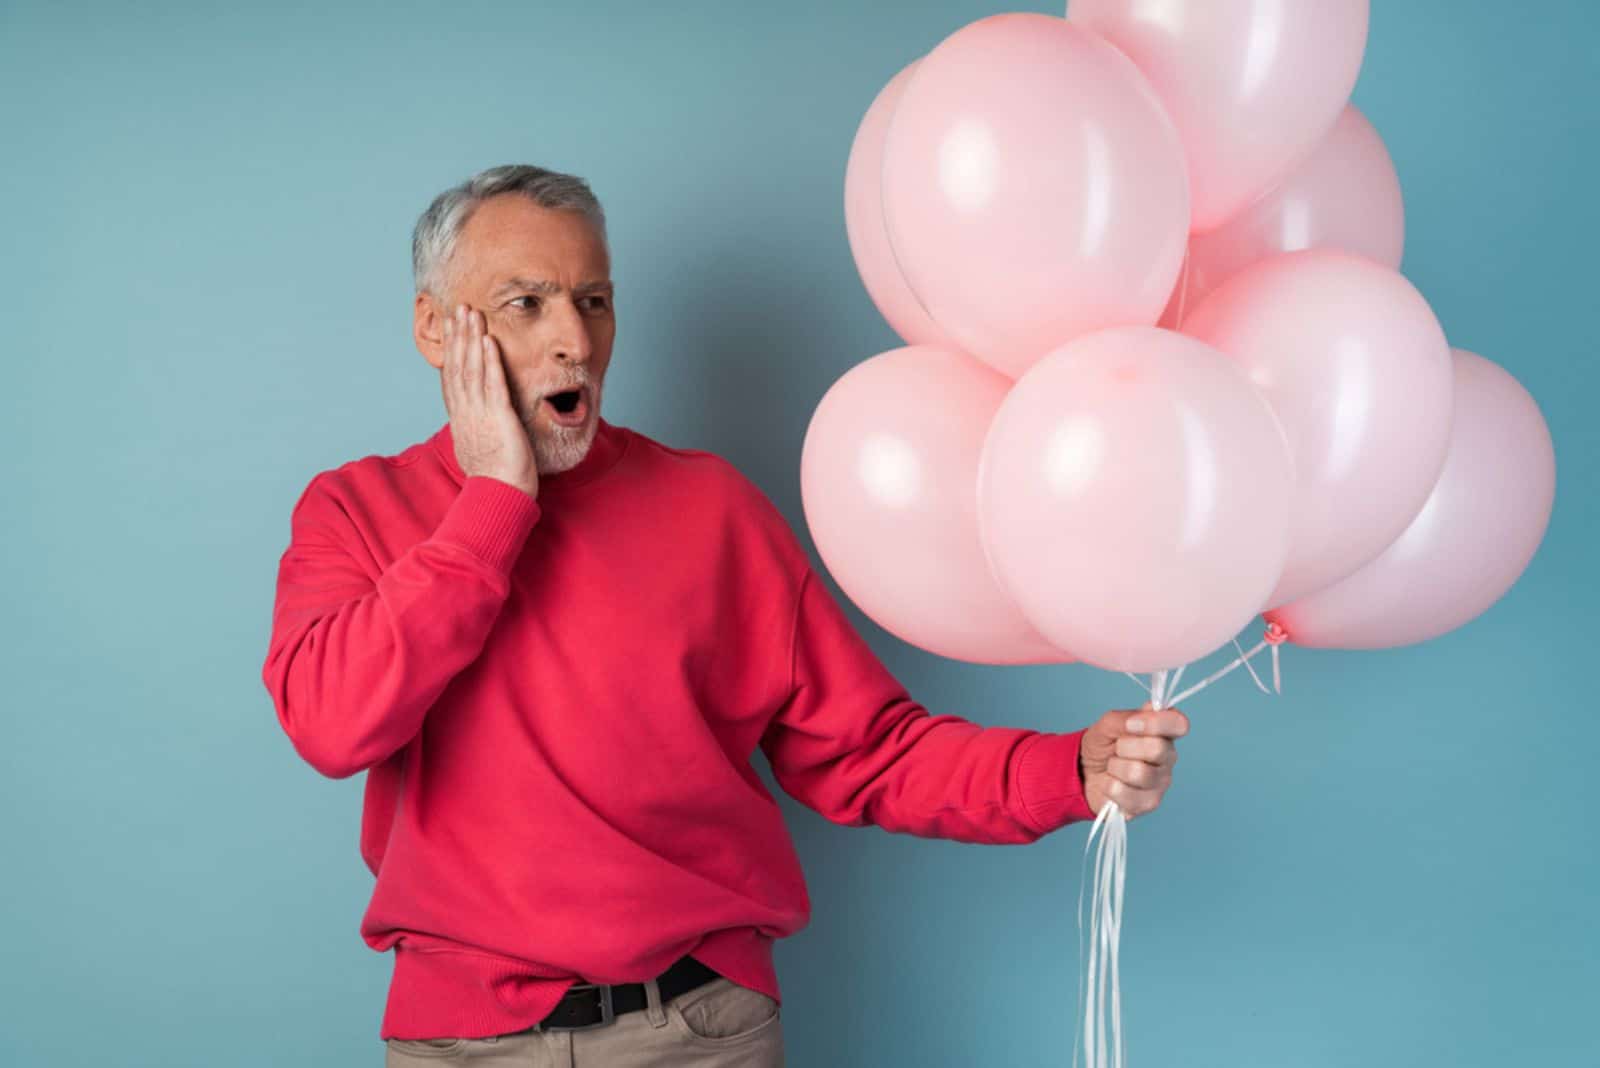 Surprised, the older man holds pink balloons in his hand